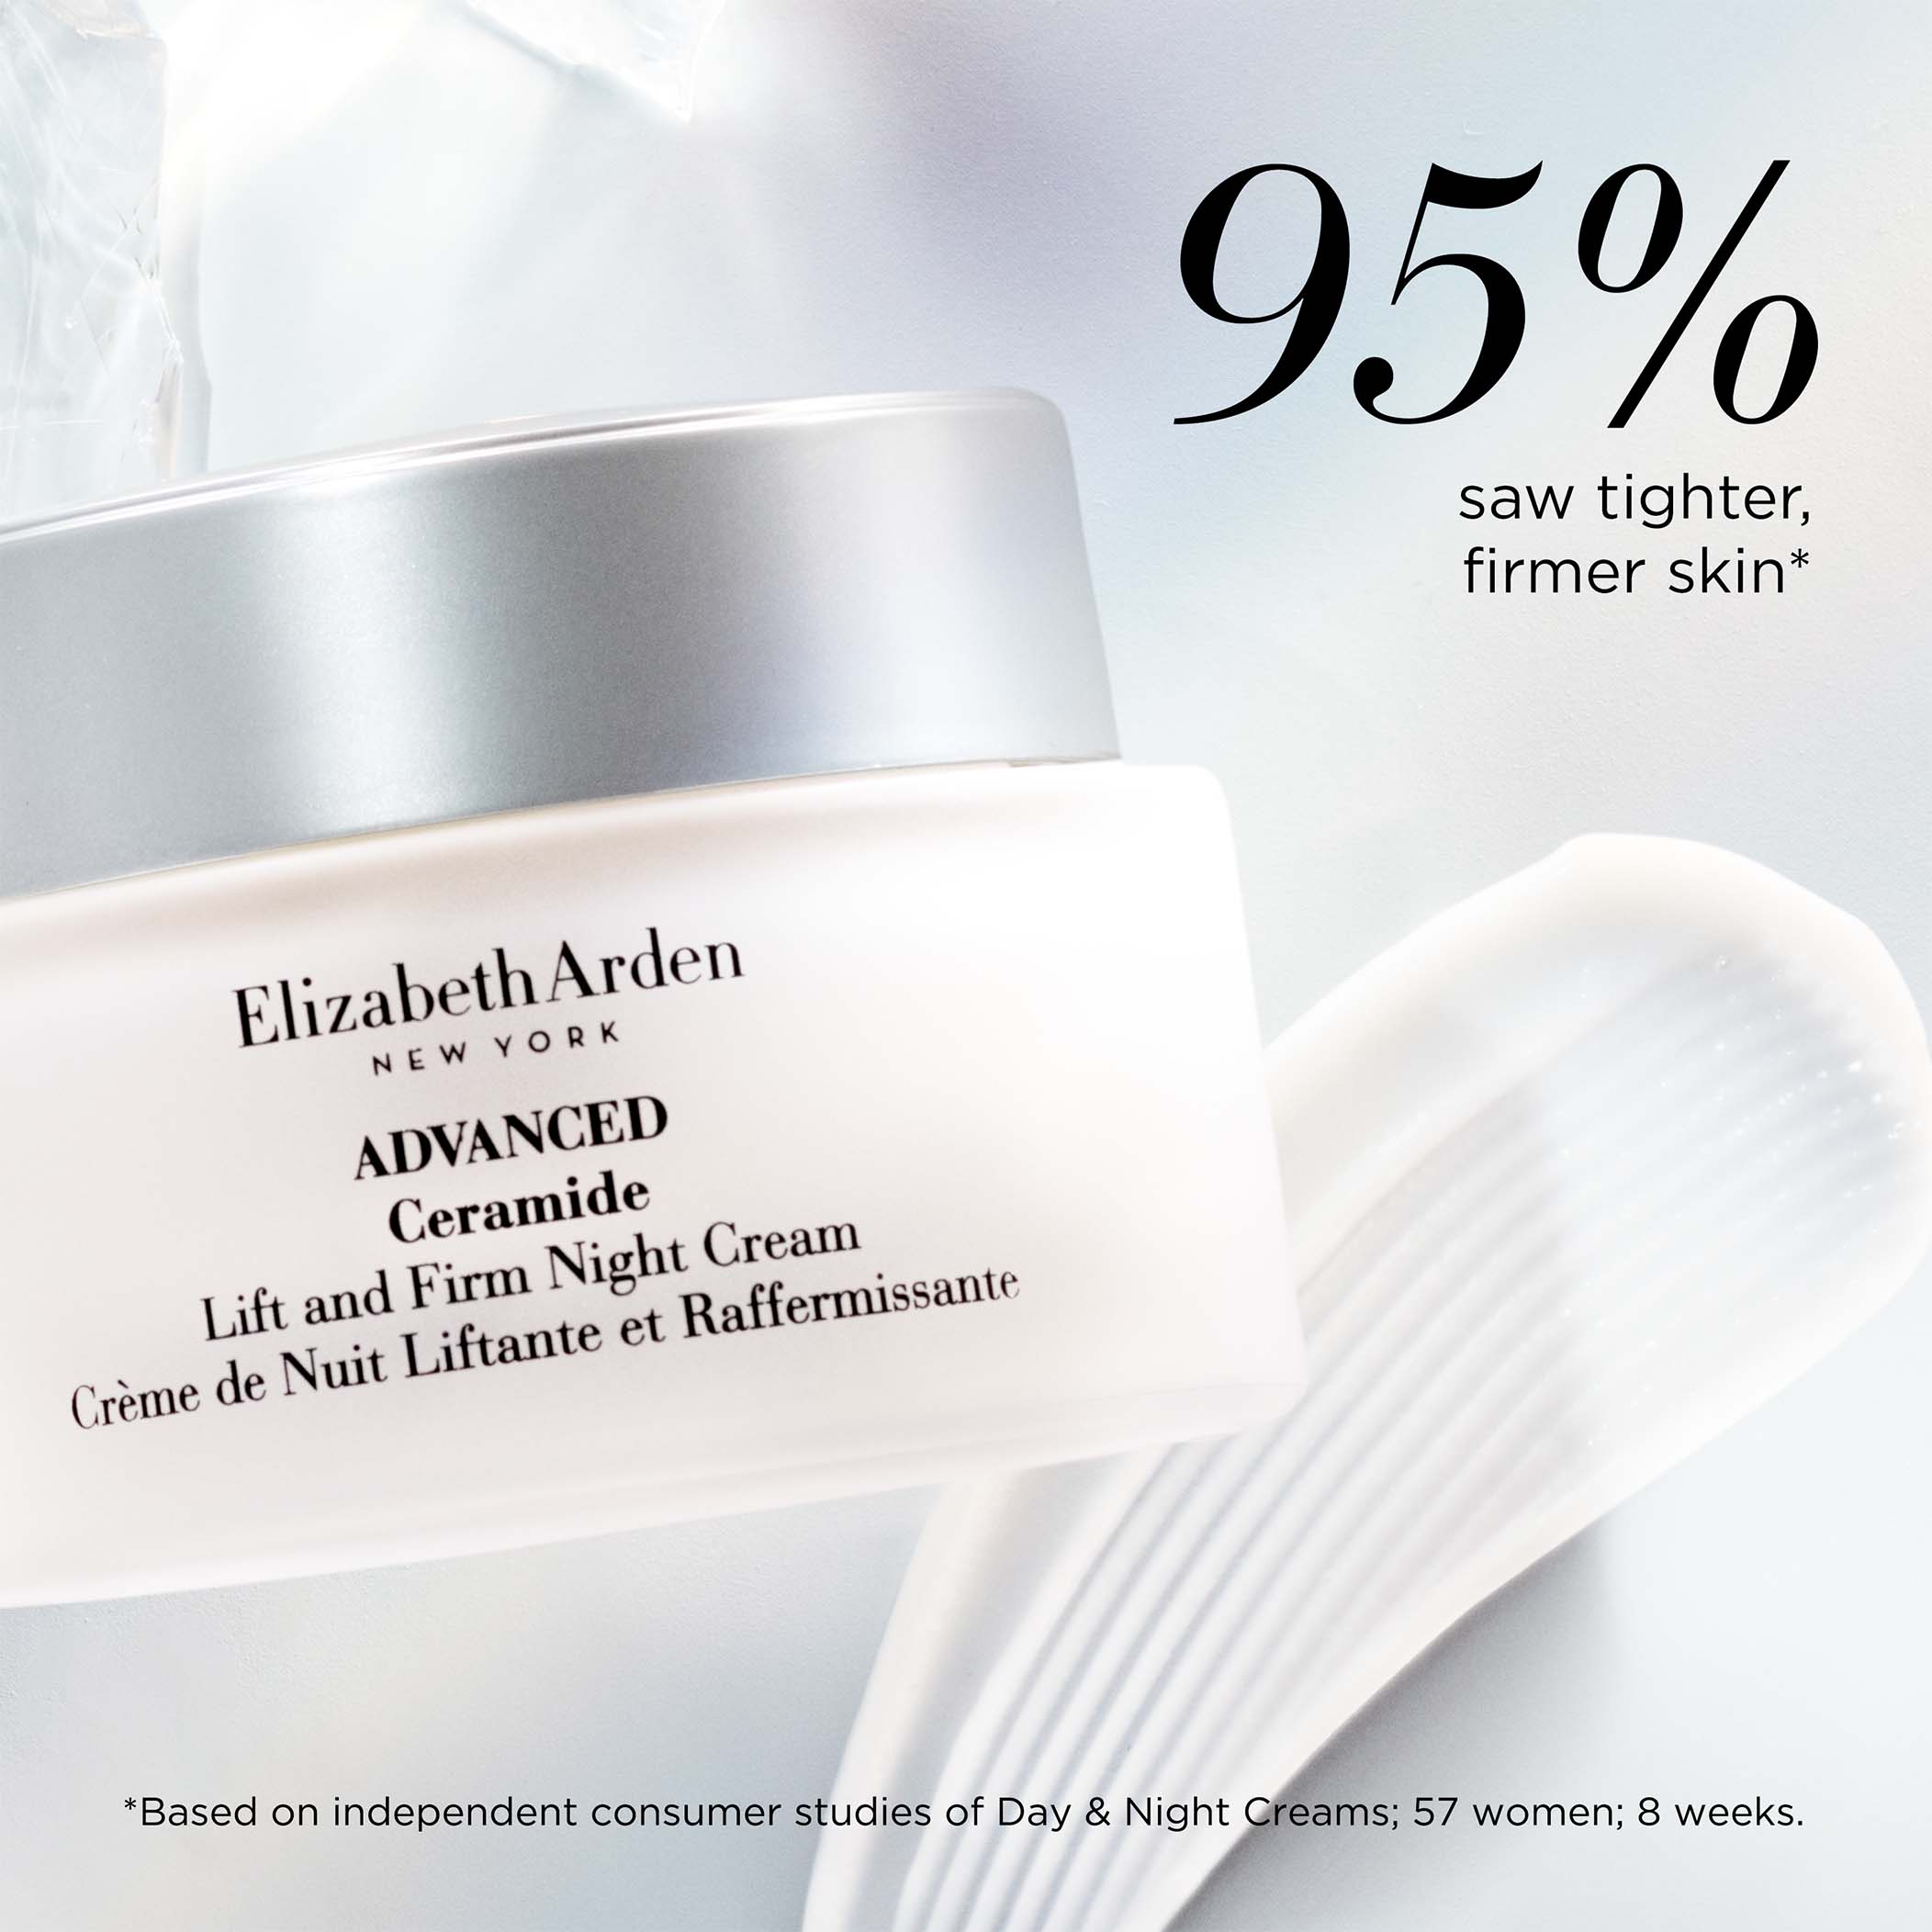 95% saw firmer, younger-looking skin based on independent consumer studies of Day and Night Creams, 57 women, 8 week.